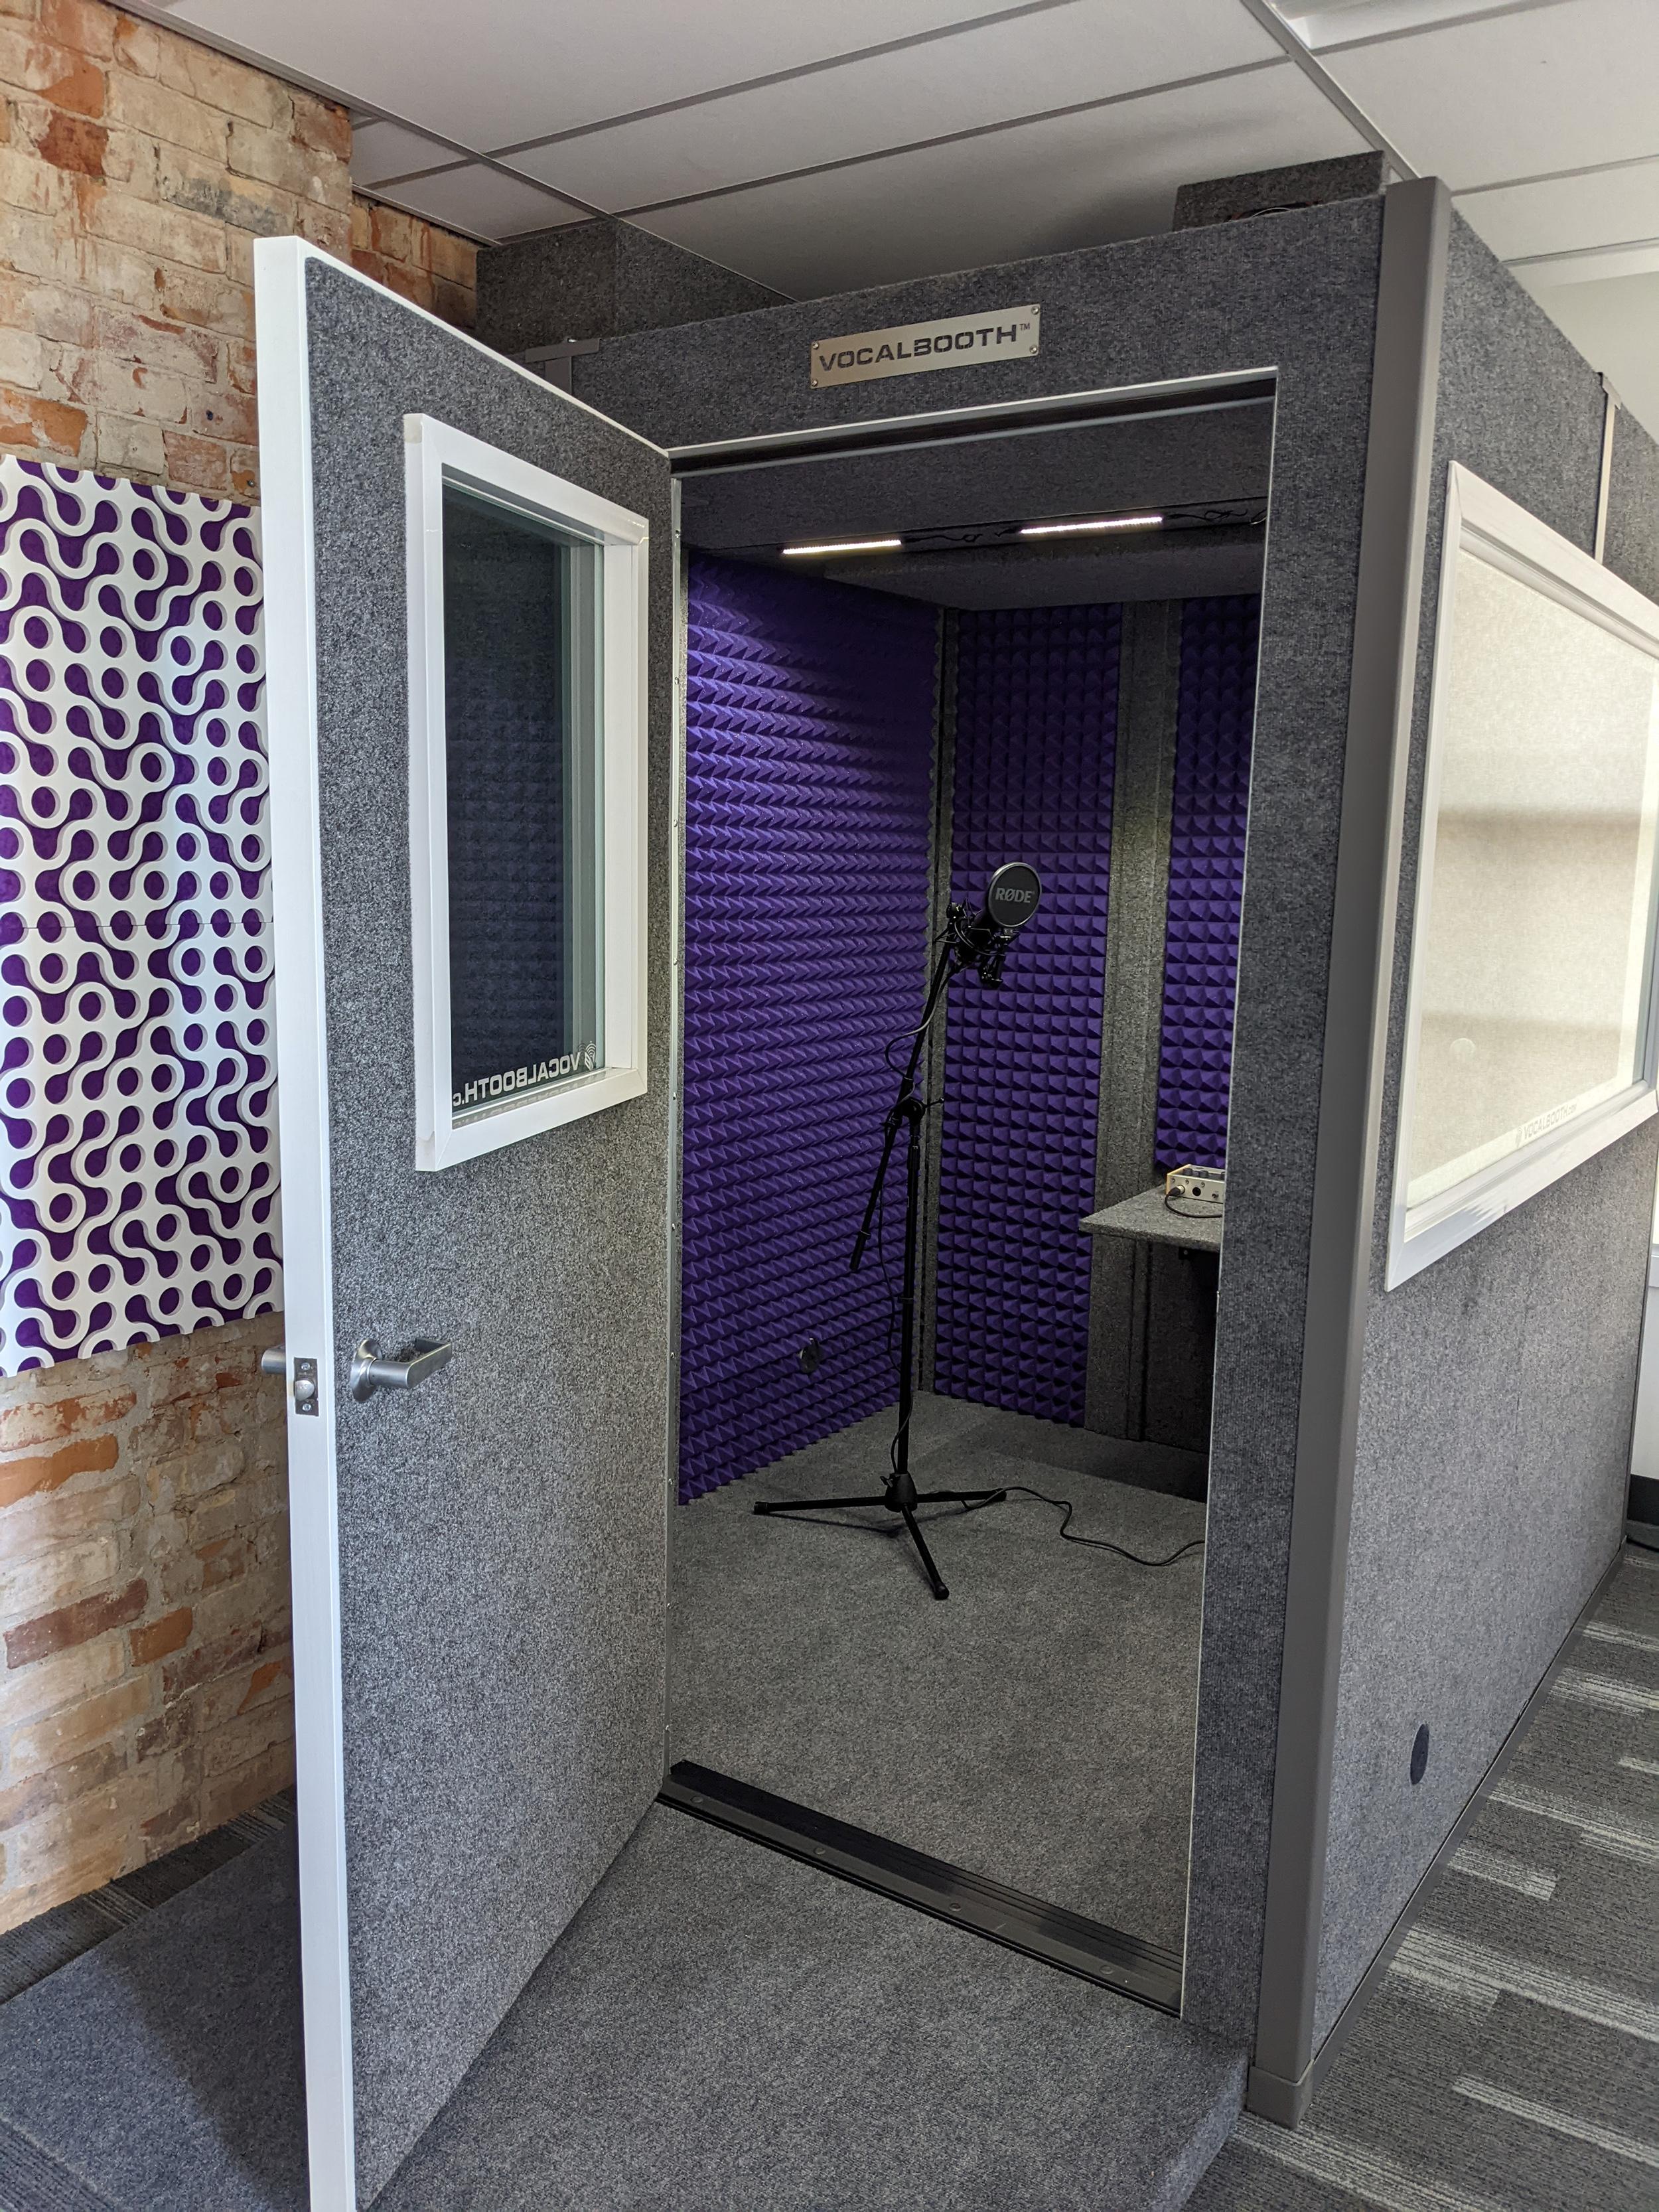 A small recording booth with a microphone.